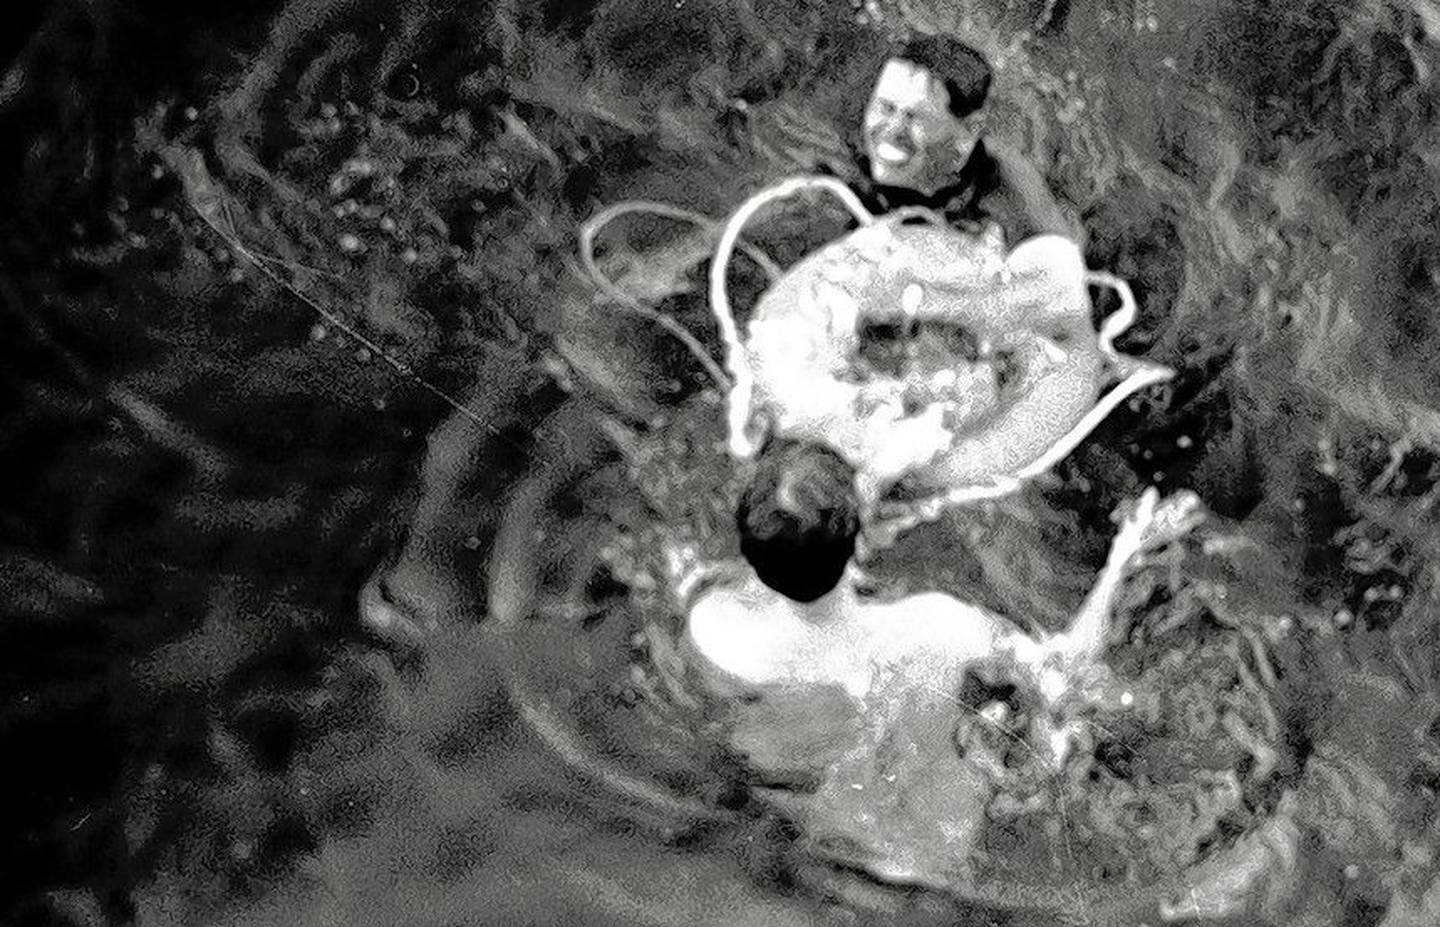 Sten Johnson of Woodstock, bottom, while a crew member of the U.S.S. Henry B. Wilson, rescues a wounded Marine from the waters off Cambodia's Kho Tang island during the Mayaguez incident in May 1975 -- the last battle of the Vietnam War.